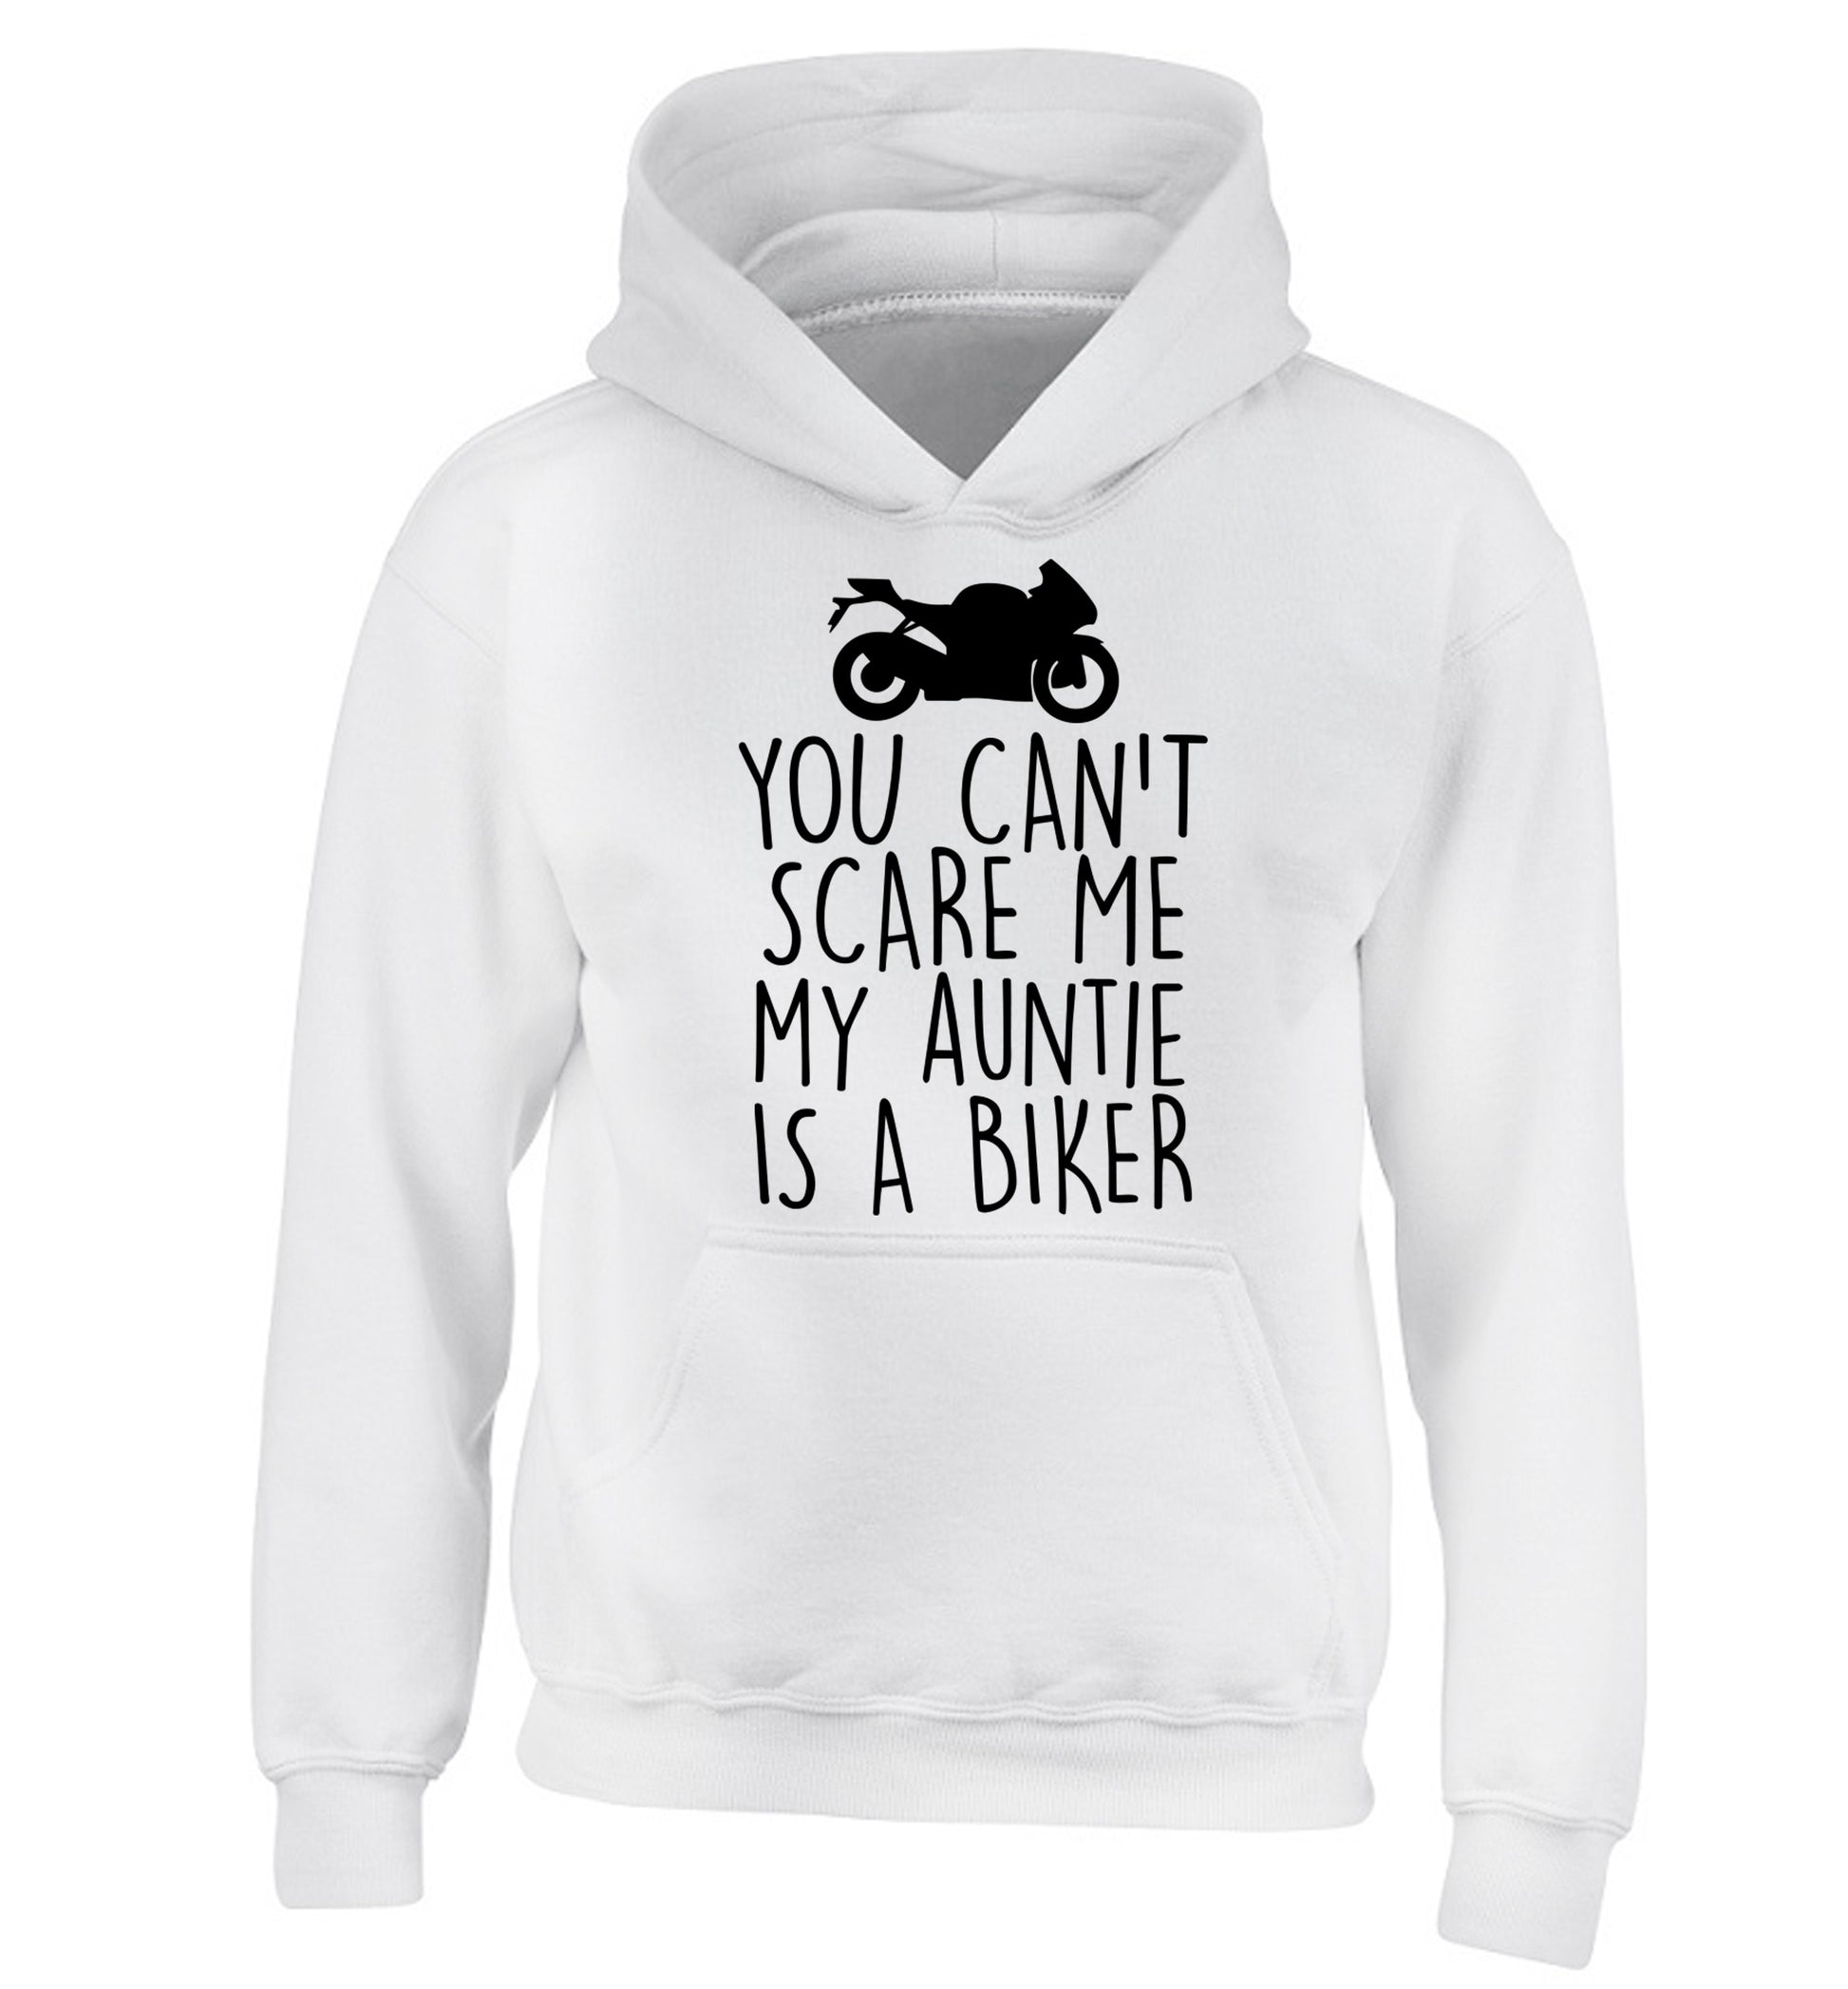 You can't scare me my auntie is a biker children's white hoodie 12-13 Years